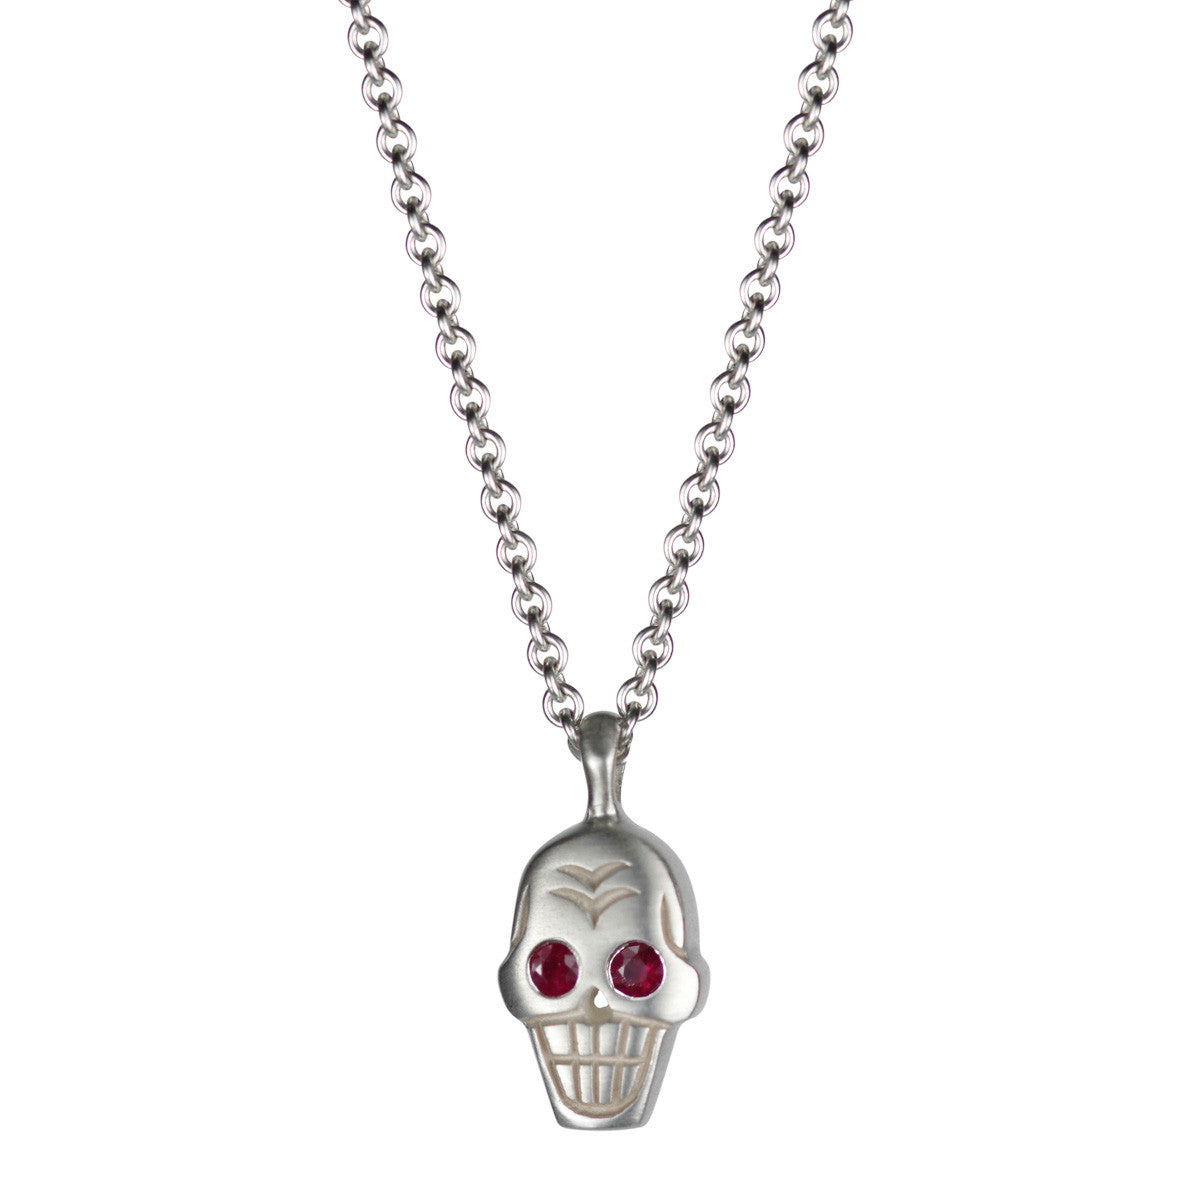 Men's Sterling Silver Large Skull Pendant with Ruby Eyes